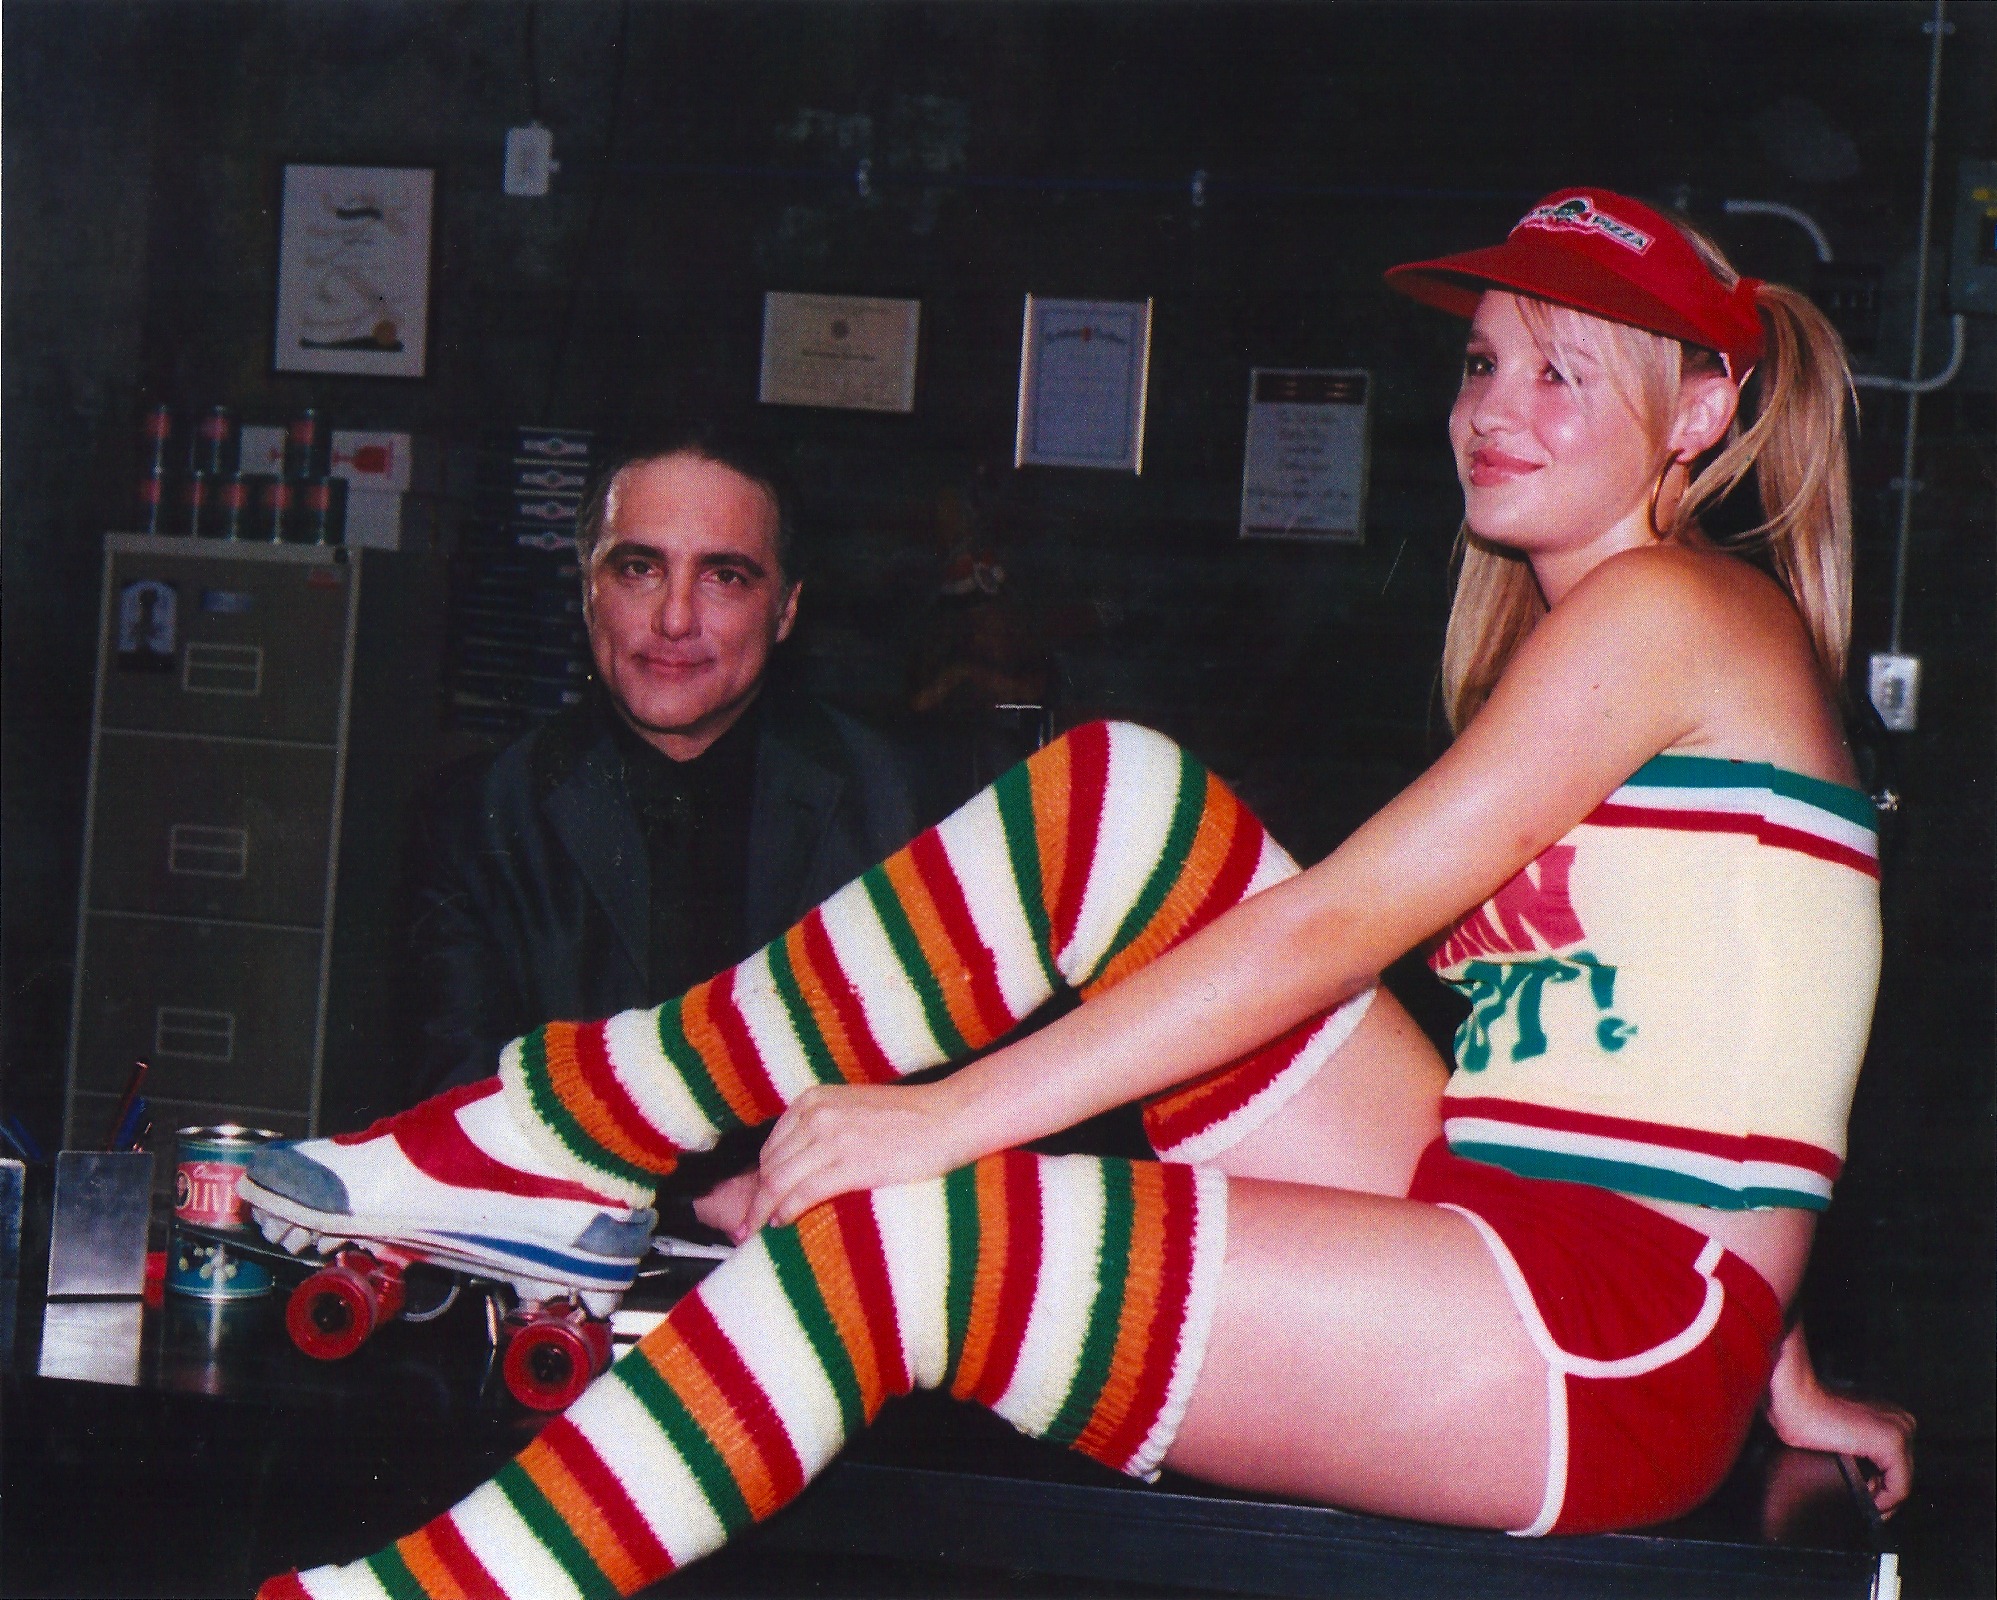 Actor Richard D'Alessandro in South Africa, shooting a Commercial for New York Pizza . The girl is the roller girl in the commercial . We do not have her name as of yet